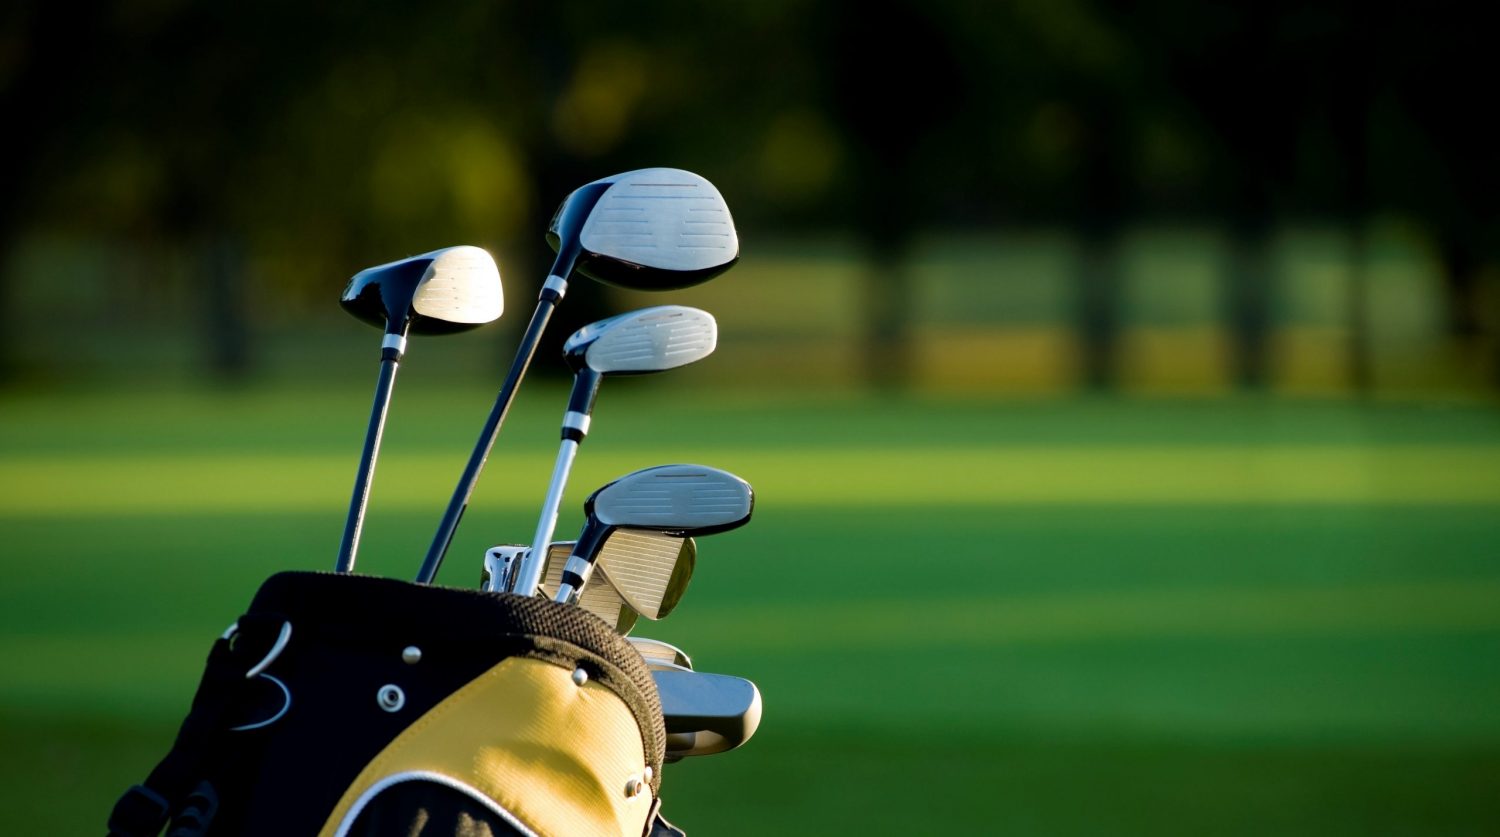 Golf clubs | Golfing near Indianapolis